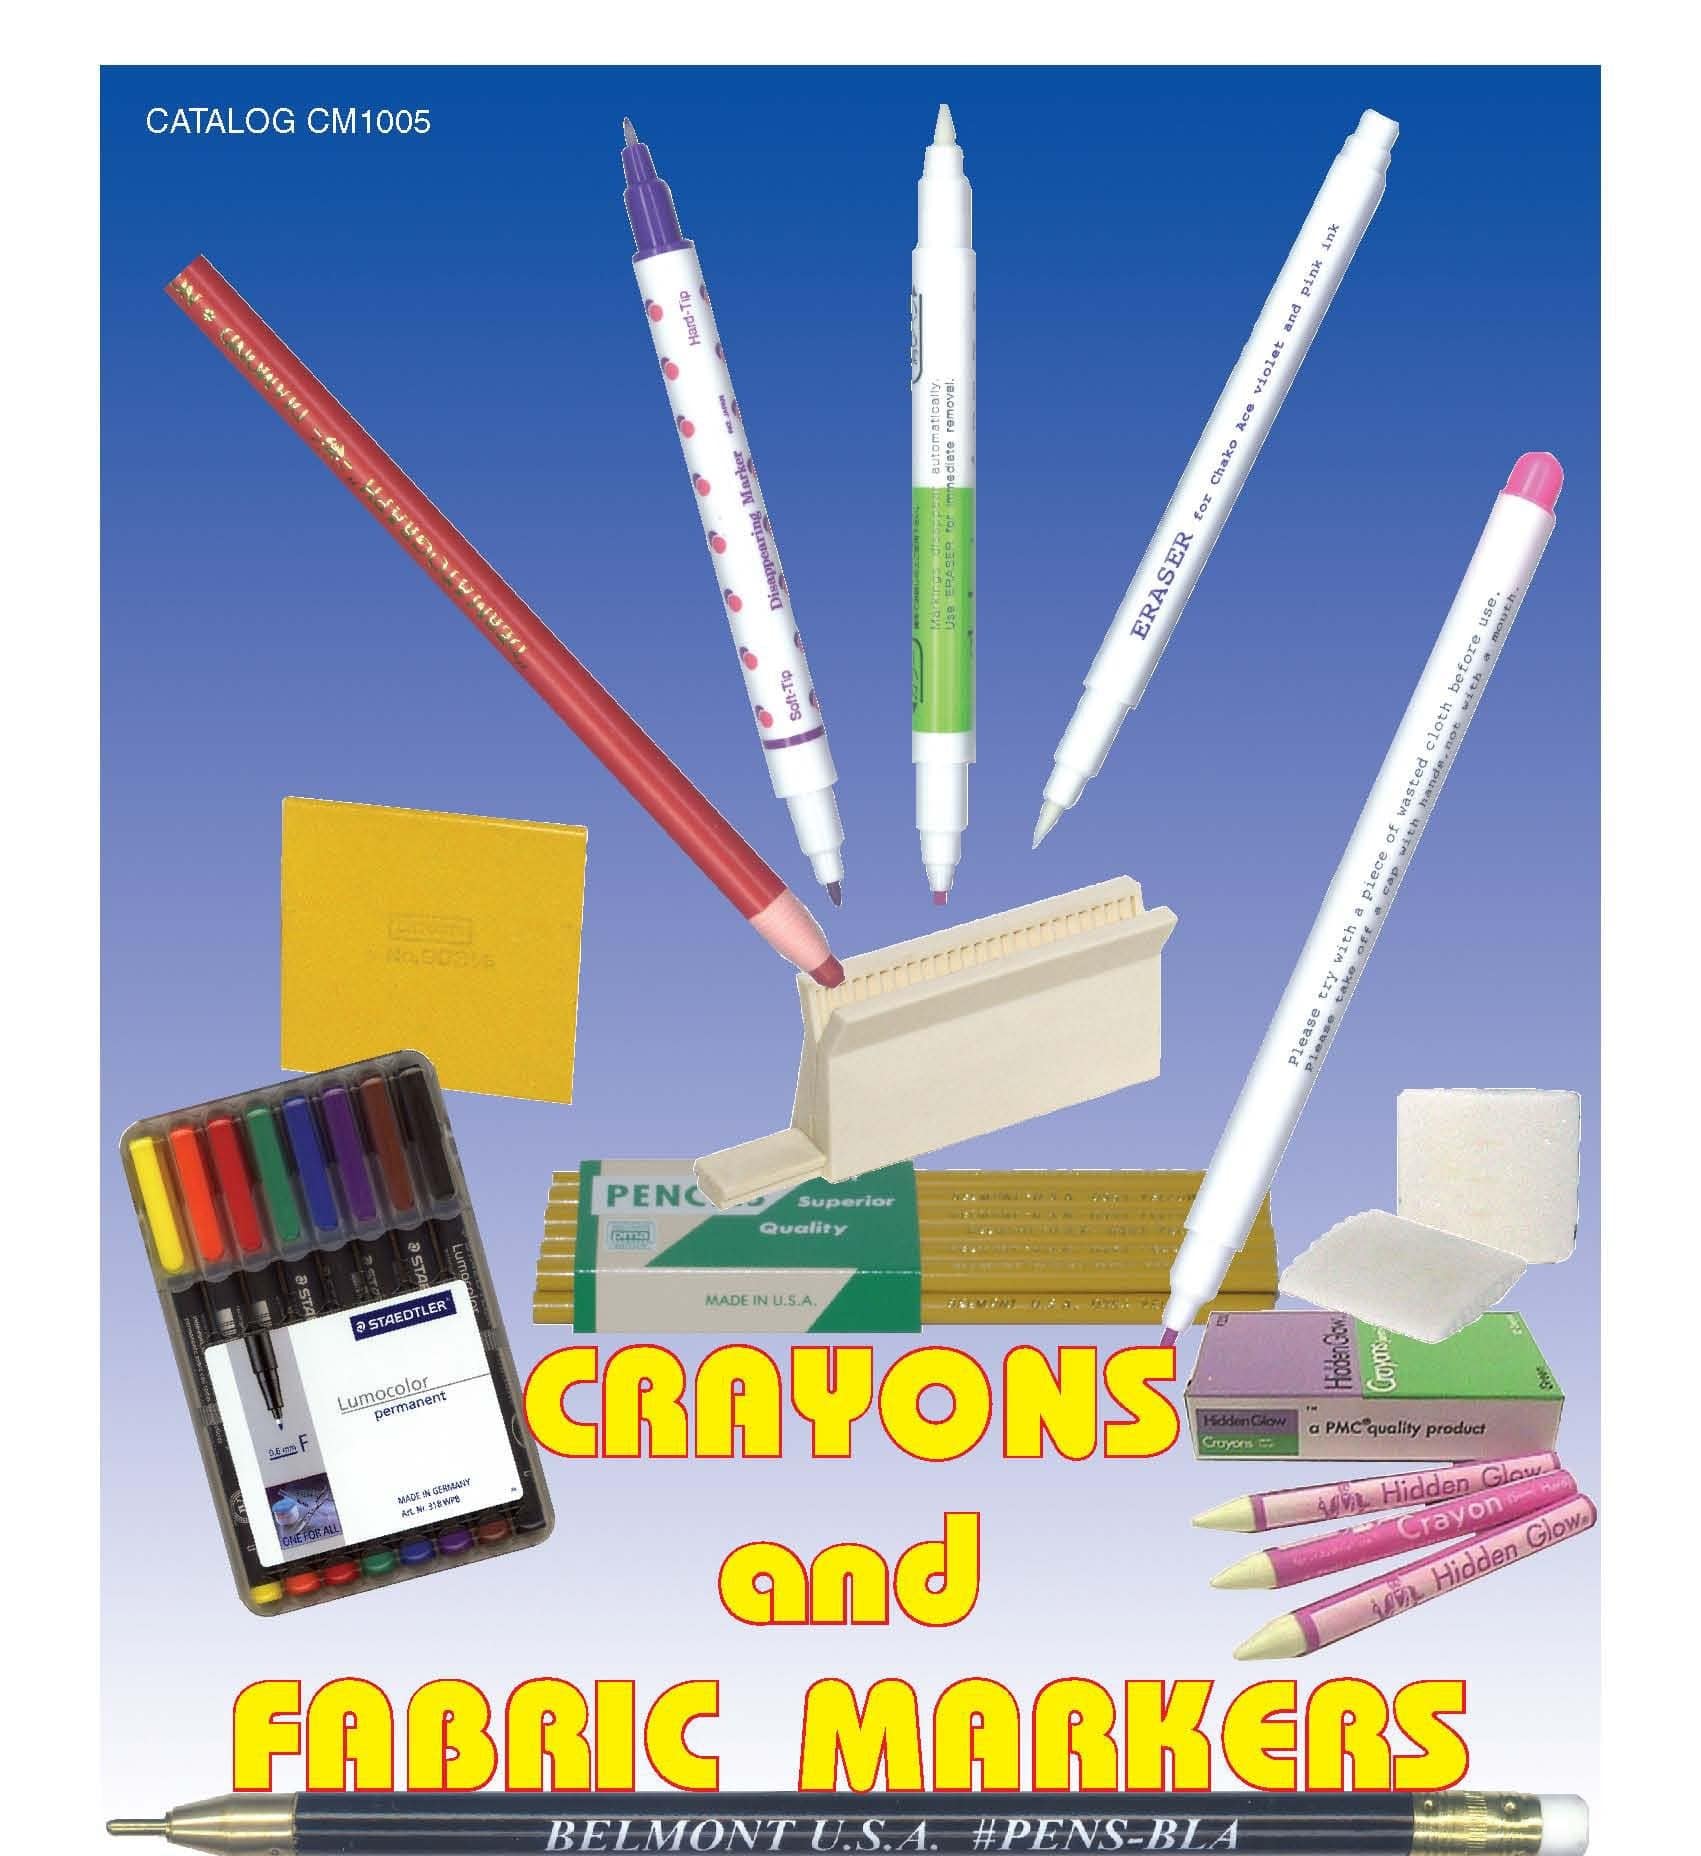 TAILORS CHALK, TAILORS PENS, 
TAILORS DISAPPEARING MARKERS, 
TAILORS CRAYONS, and TAILORS PENCILS